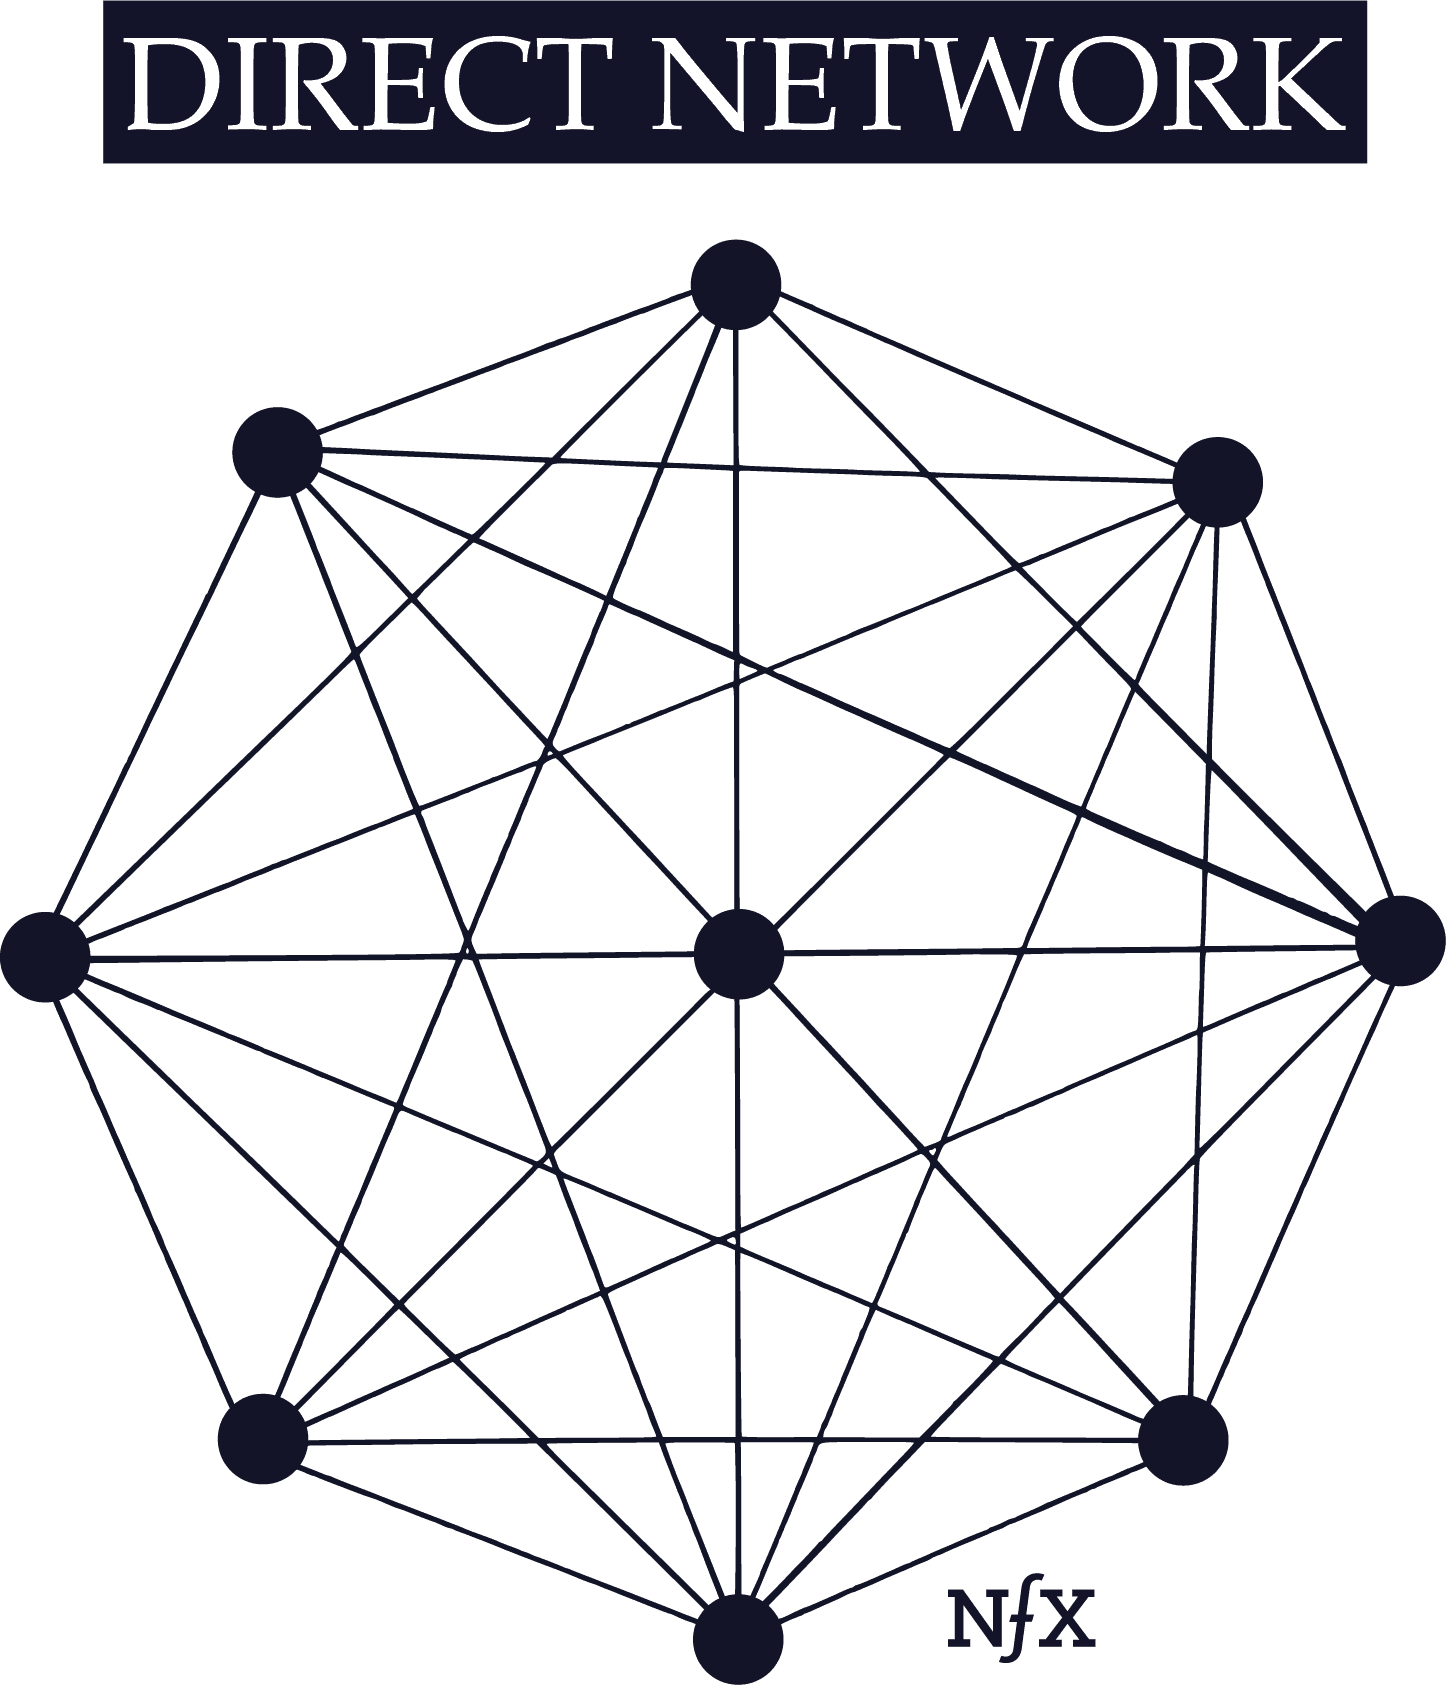 Direct Network